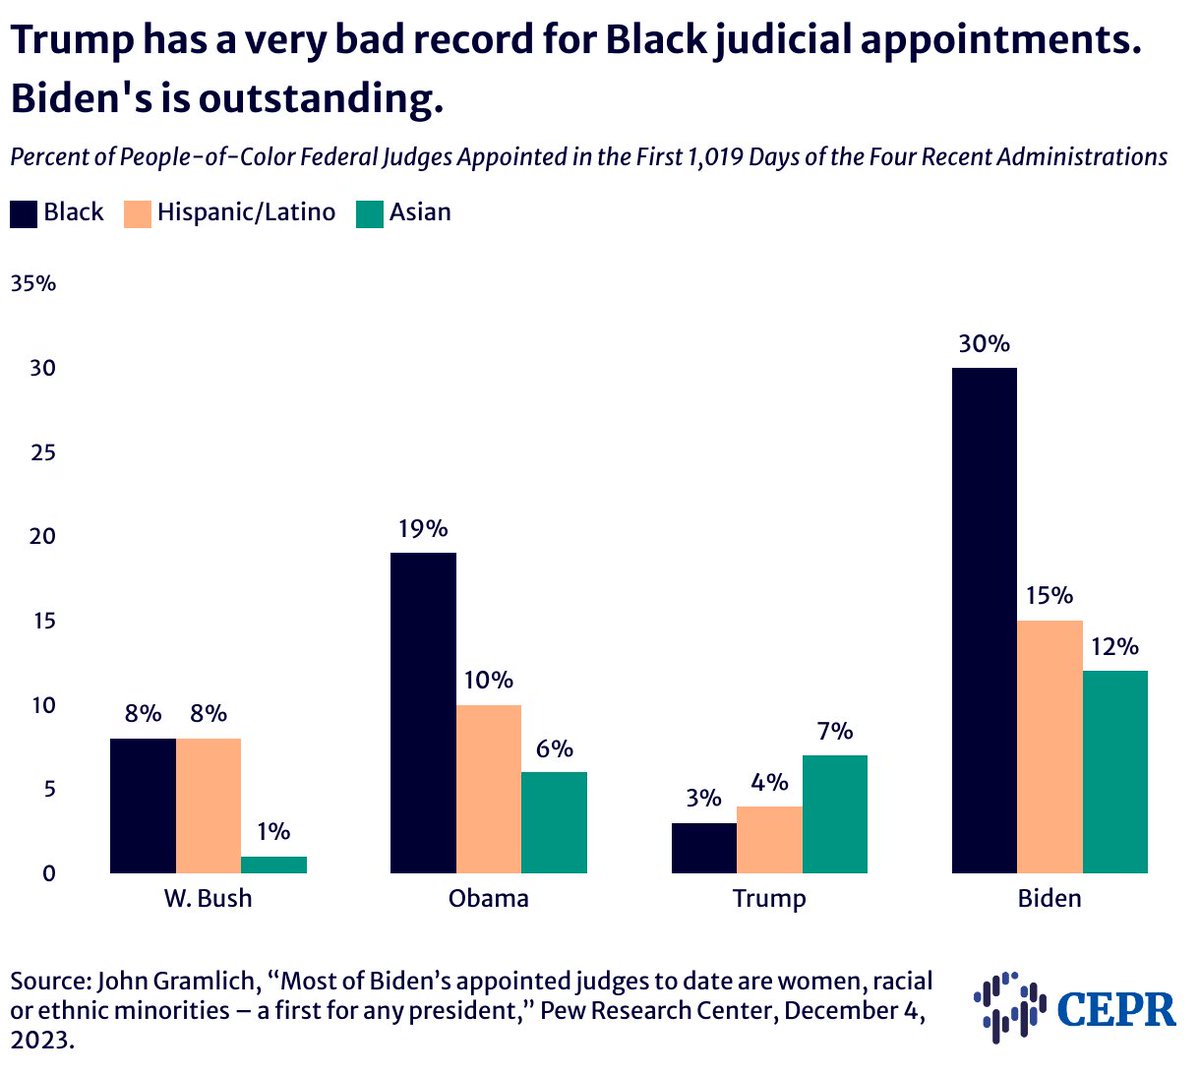 NEW: Public sector jobs are vital for Black economic mobility. Trump's pitiful record of Black appointments jeopardizes this path, while Biden has nominated 10x more Black judges - protecting opportunities. #JobsReport @algernon_austin’s report is out: bit.ly/BlackJobsThreat